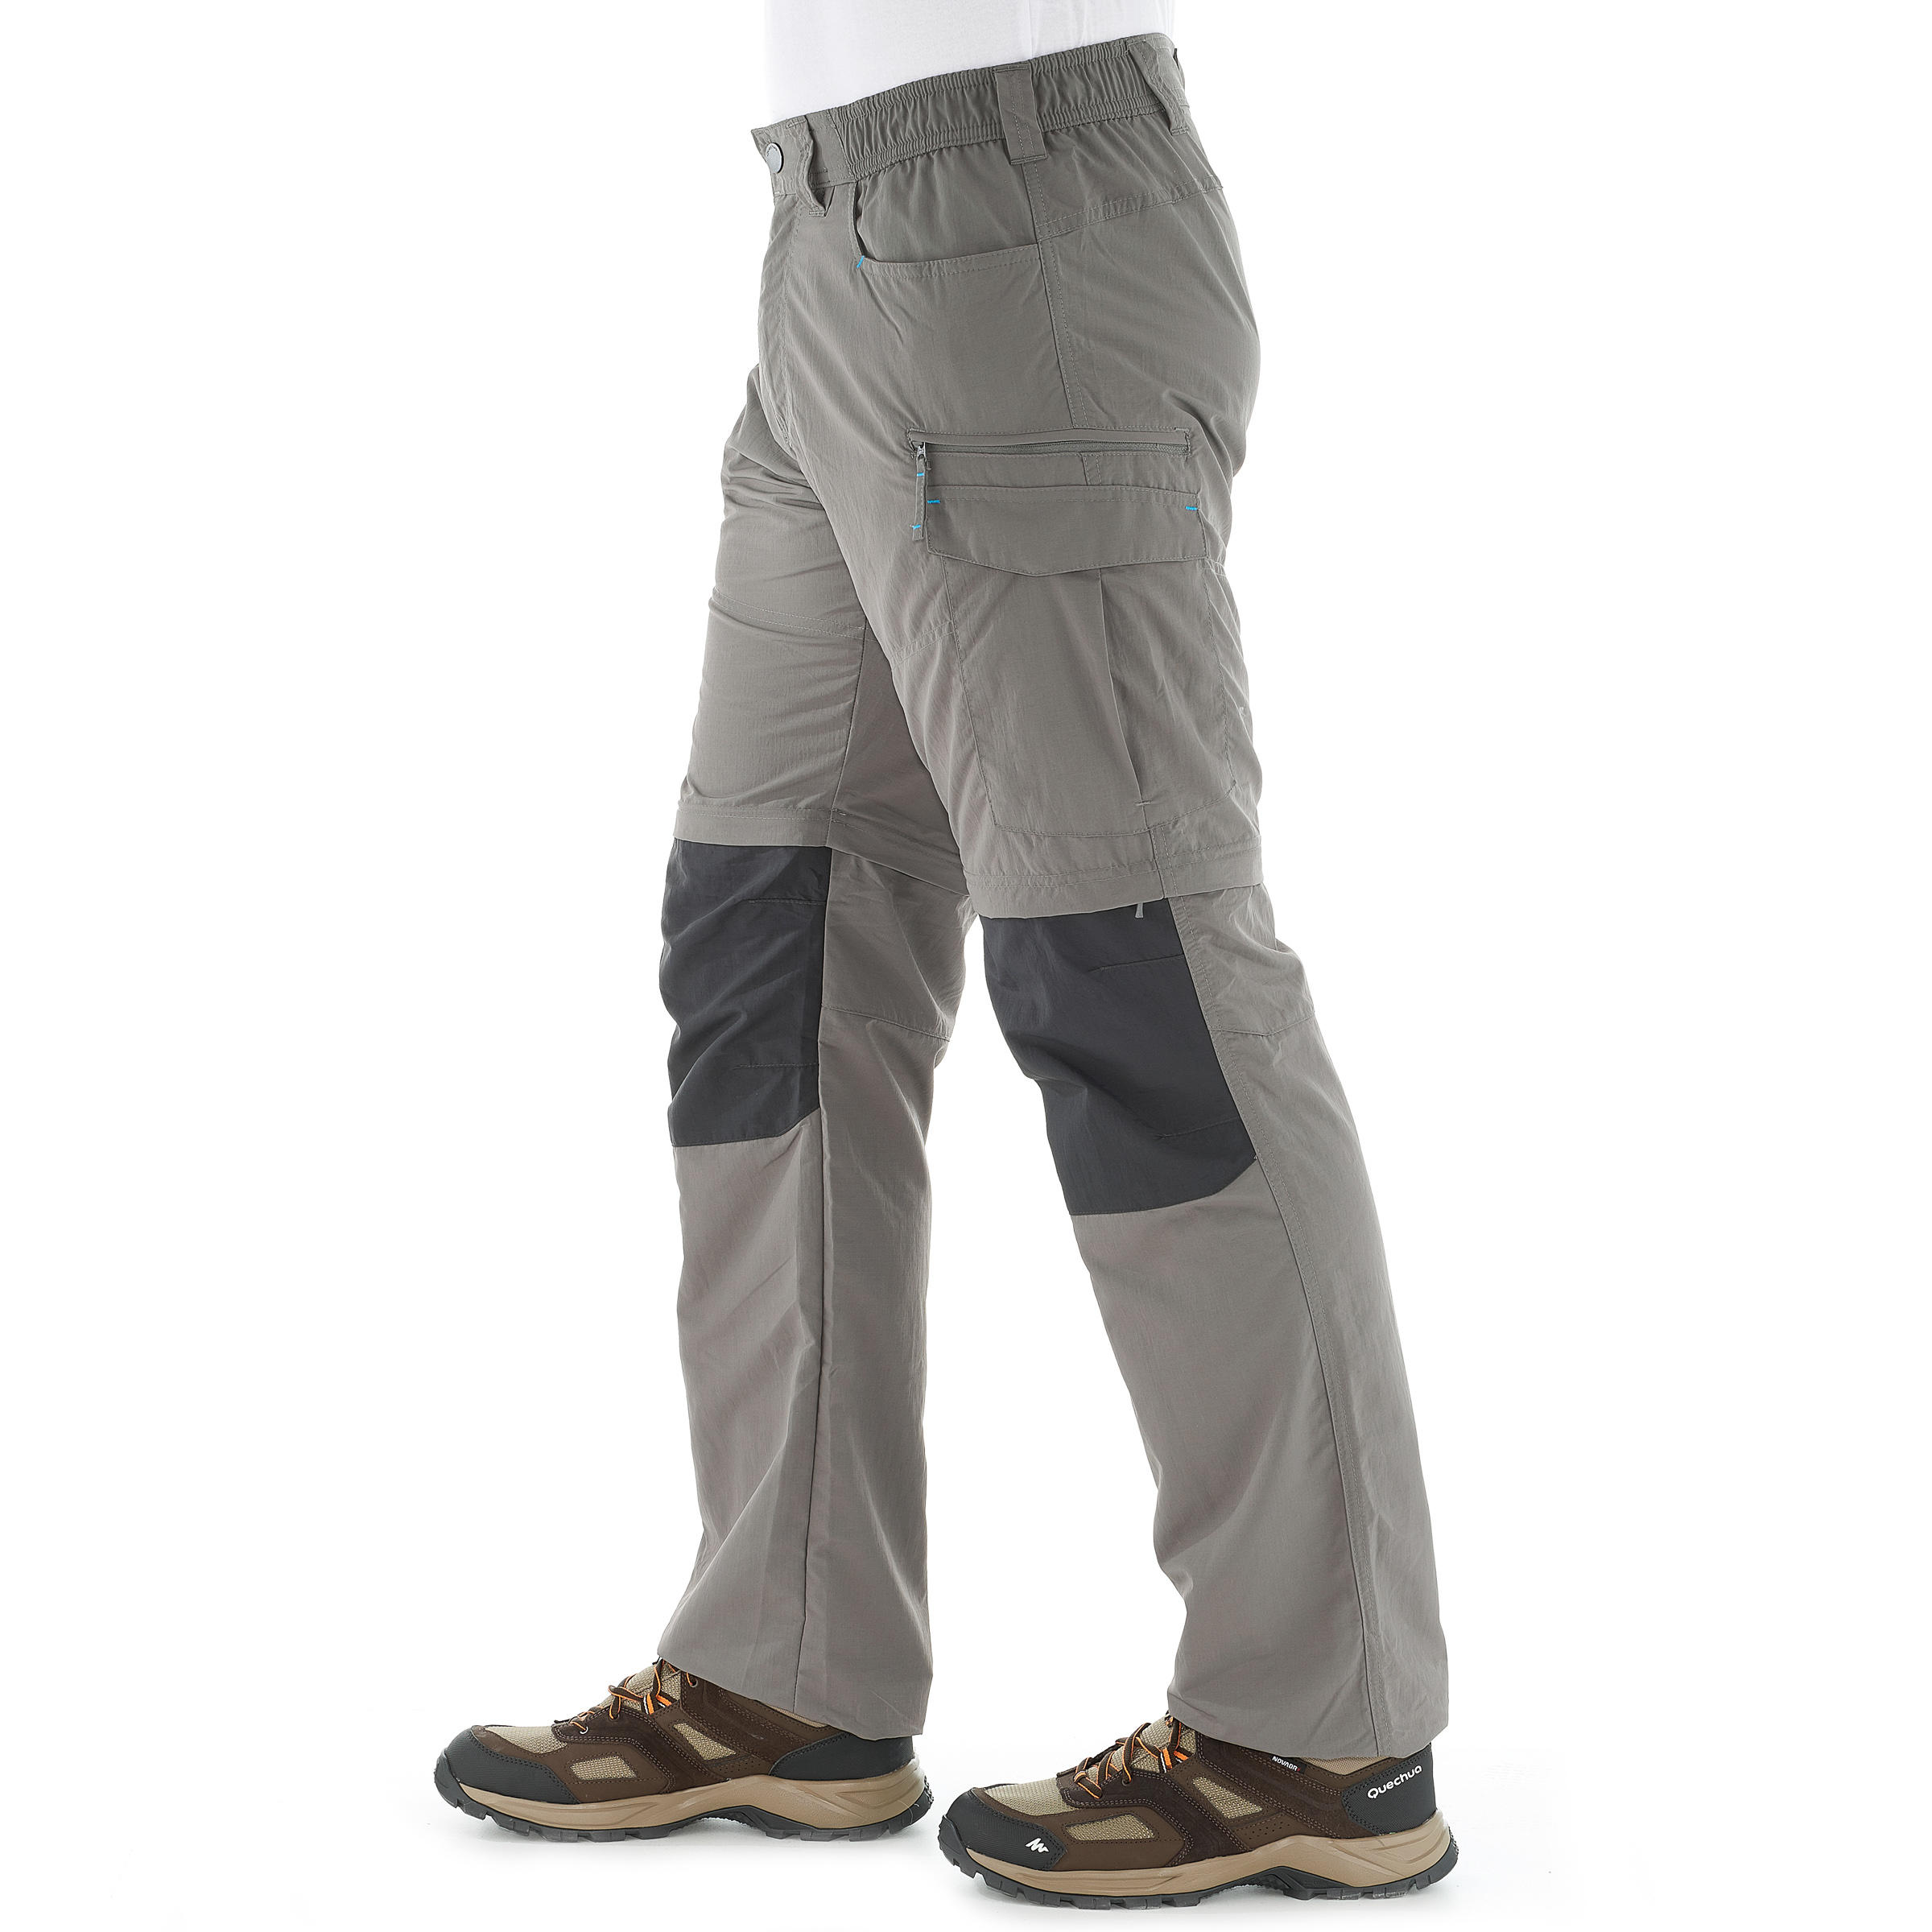 Forclaz 100 convertible hiking trousers - Light Grey 6/19